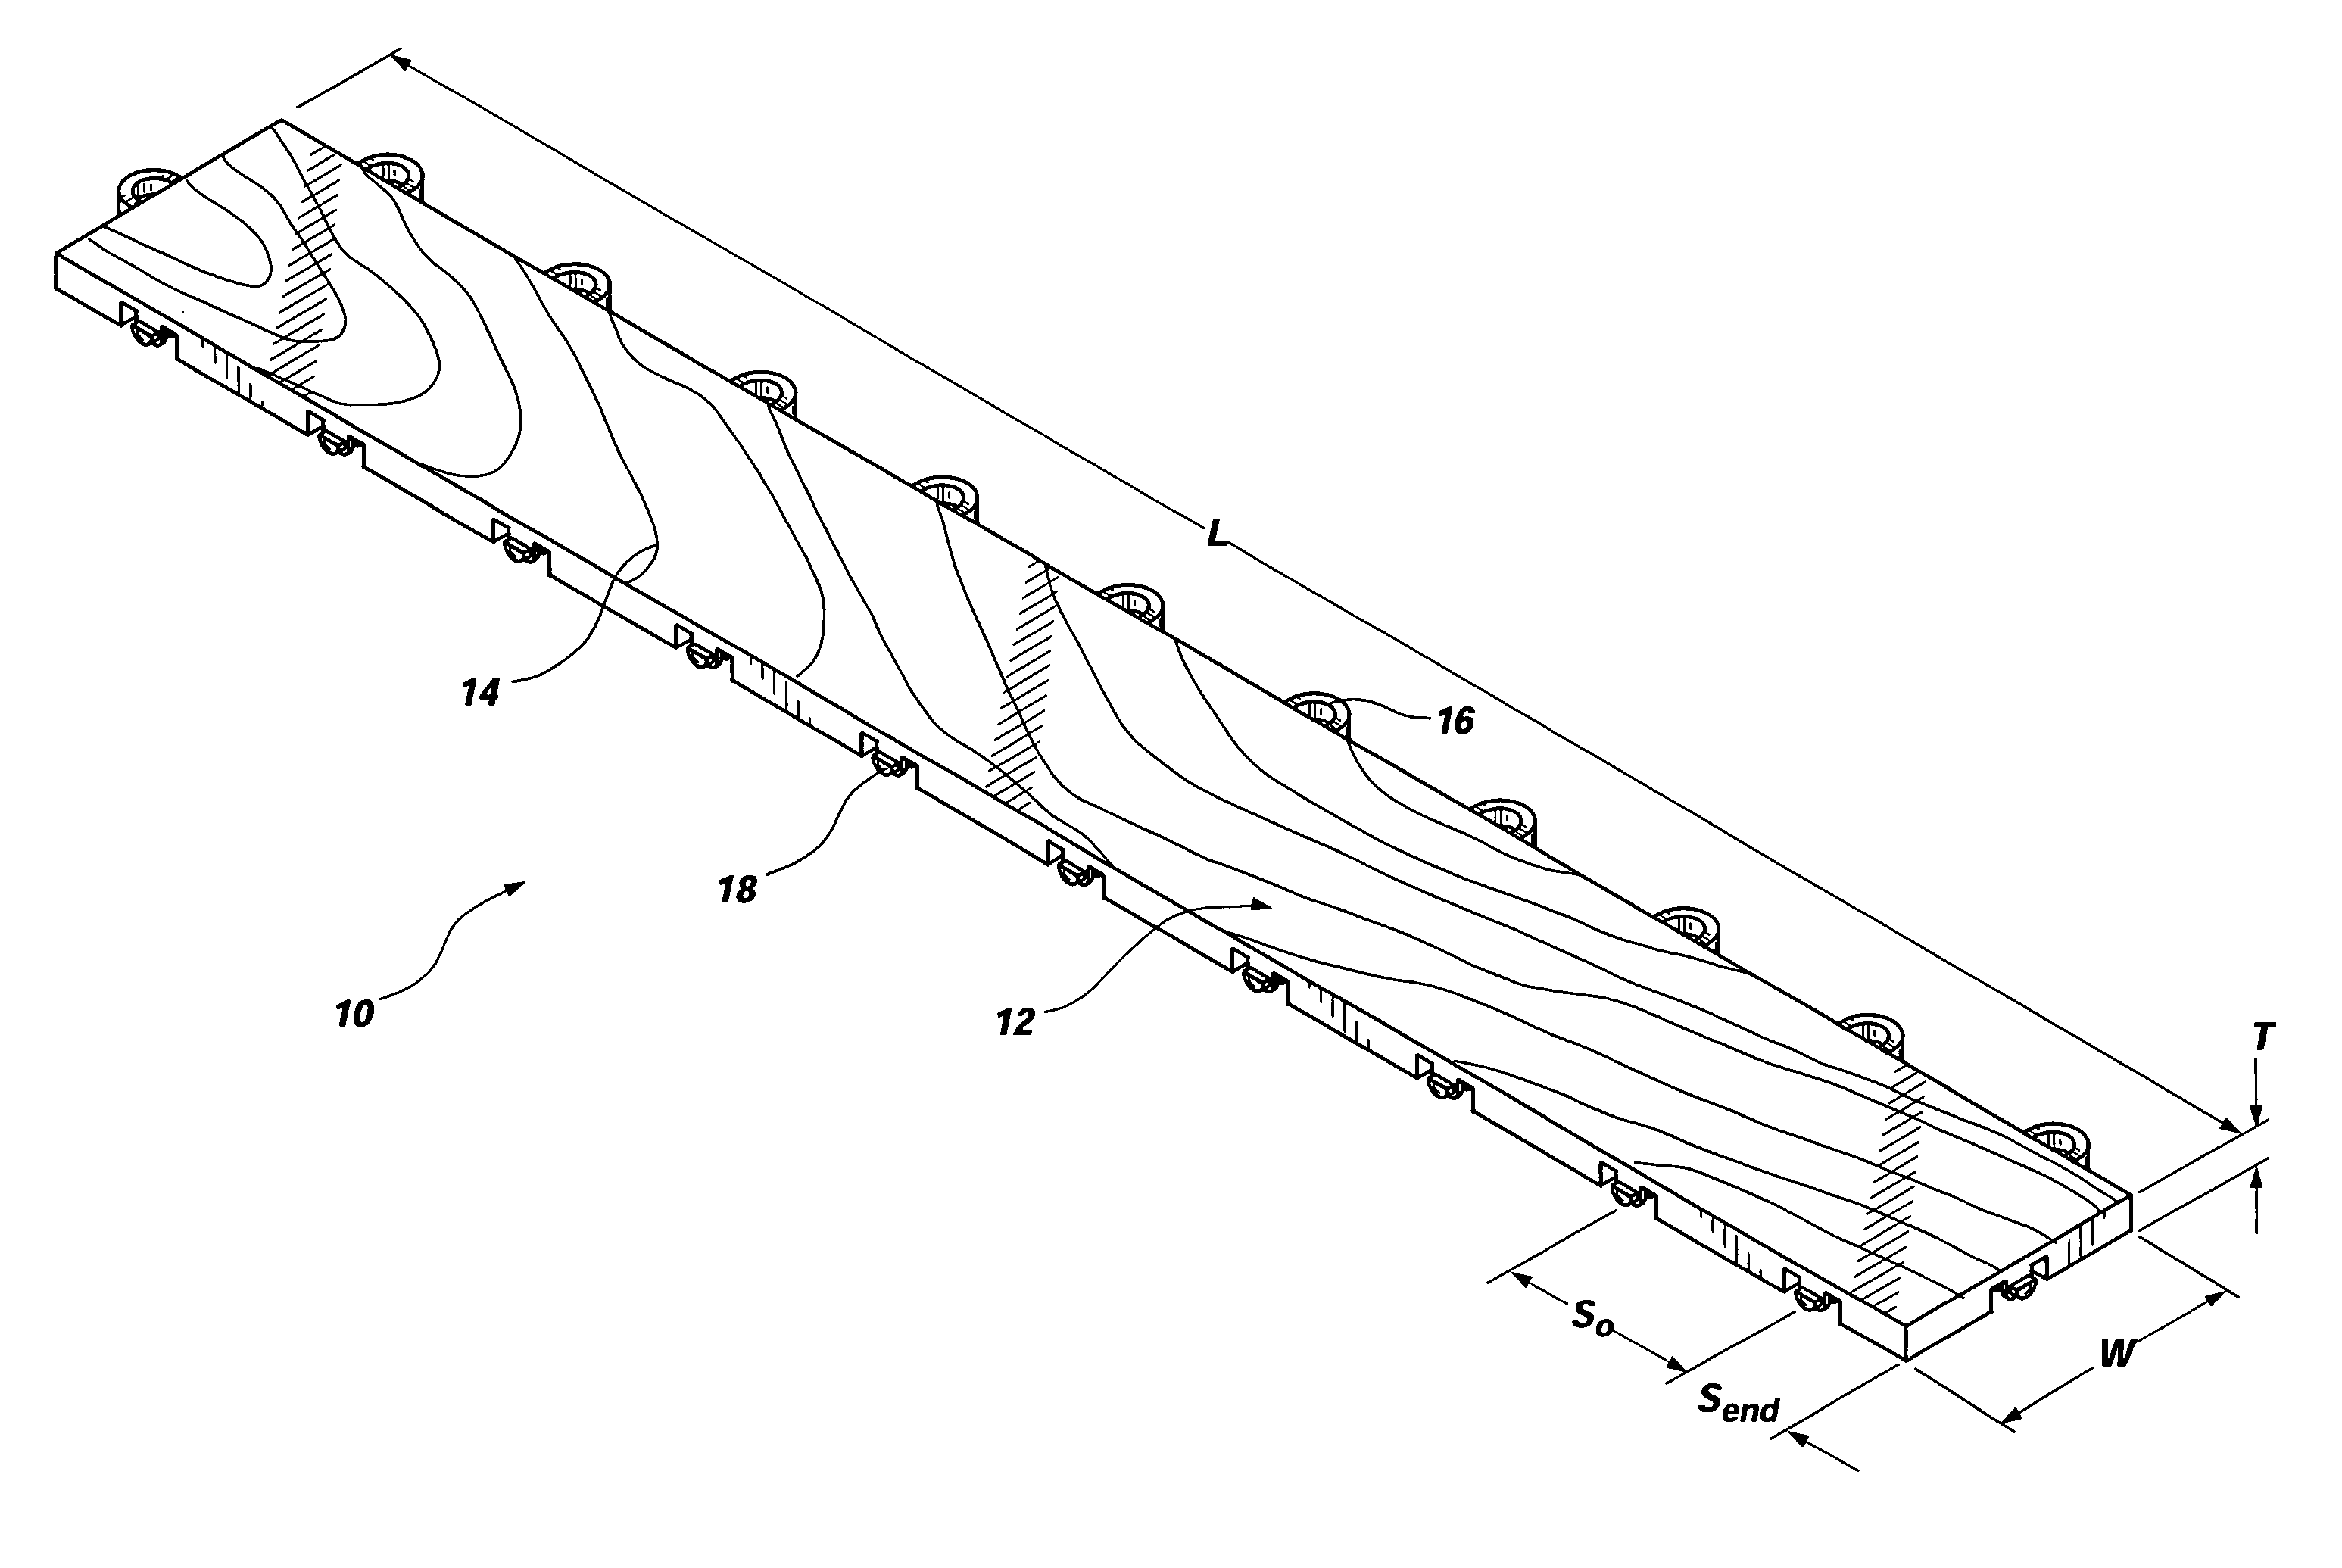 Interlocking floorboard tile system and method of manufacture